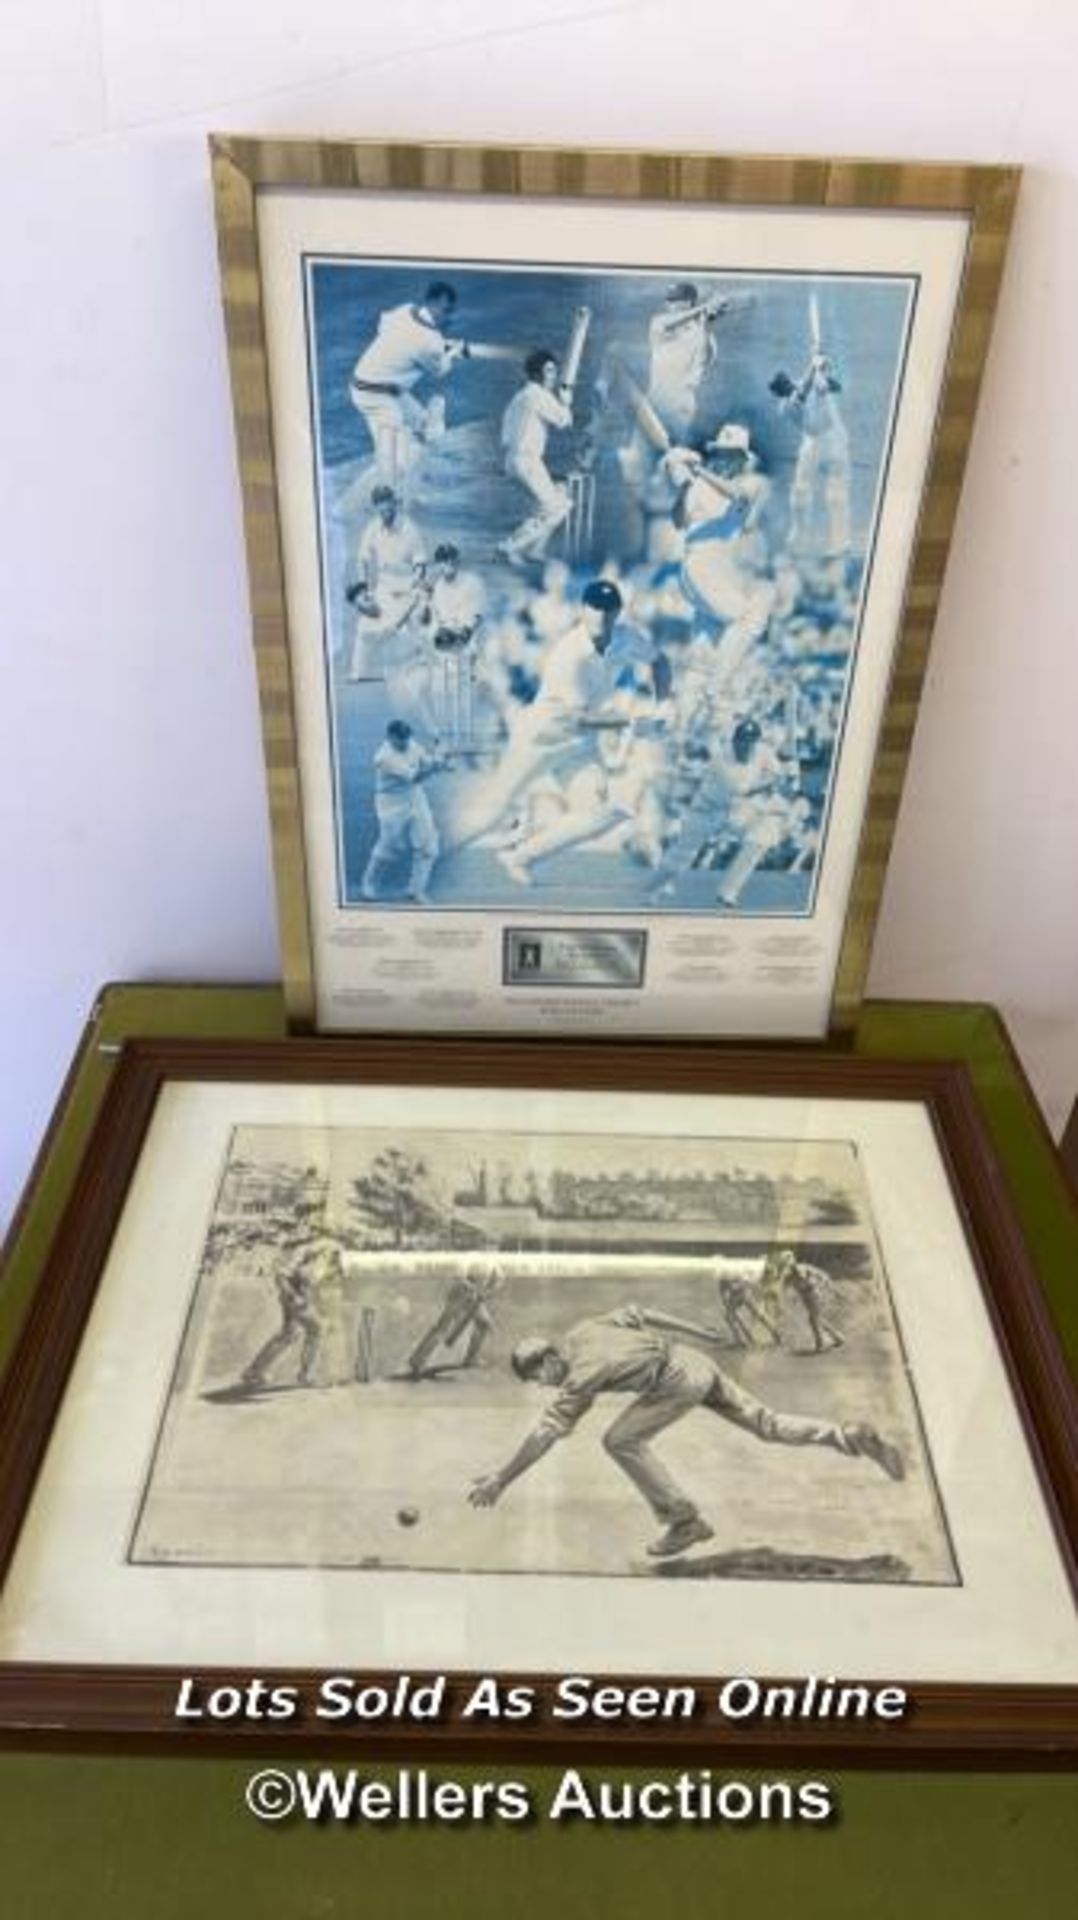 TWO FRAMED AND GLAZED PRINTS, INCLUDING THE ENGLISH BATSMAN HALL OF FAME